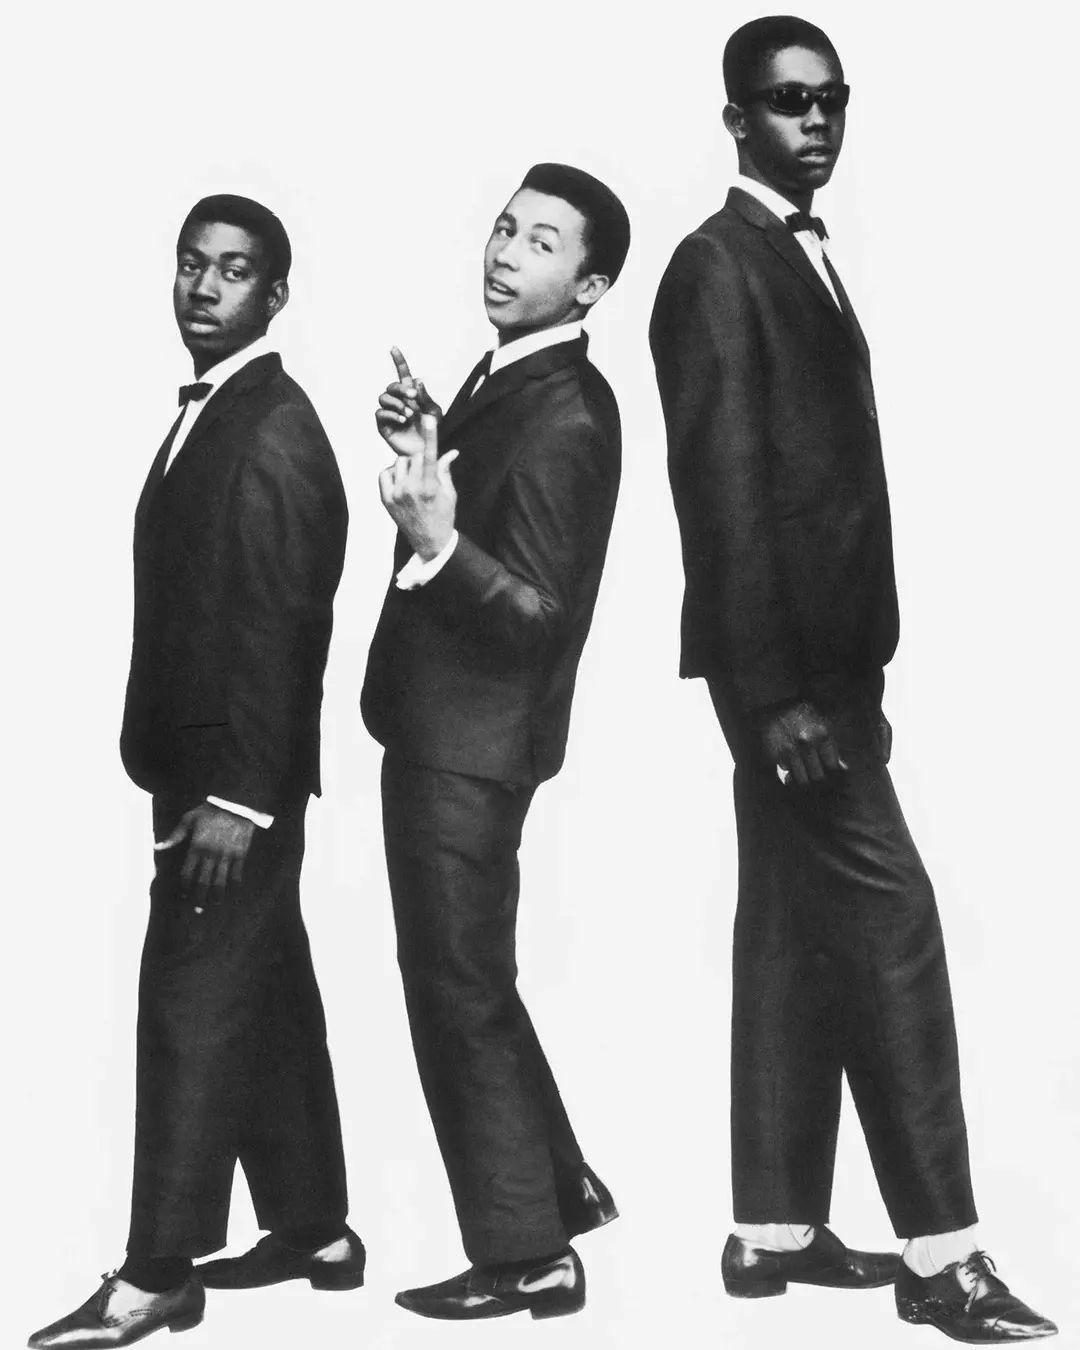 Bob Marley, Peter Tosh, And Bunny Wailer Started A Ska Band In 1963 Called The Teenagers, Before Renaming Themselves The Wailing Rudeboys, Then The Wailing Wailers And Finally The Wailers. I Wonder What Became Of Them?